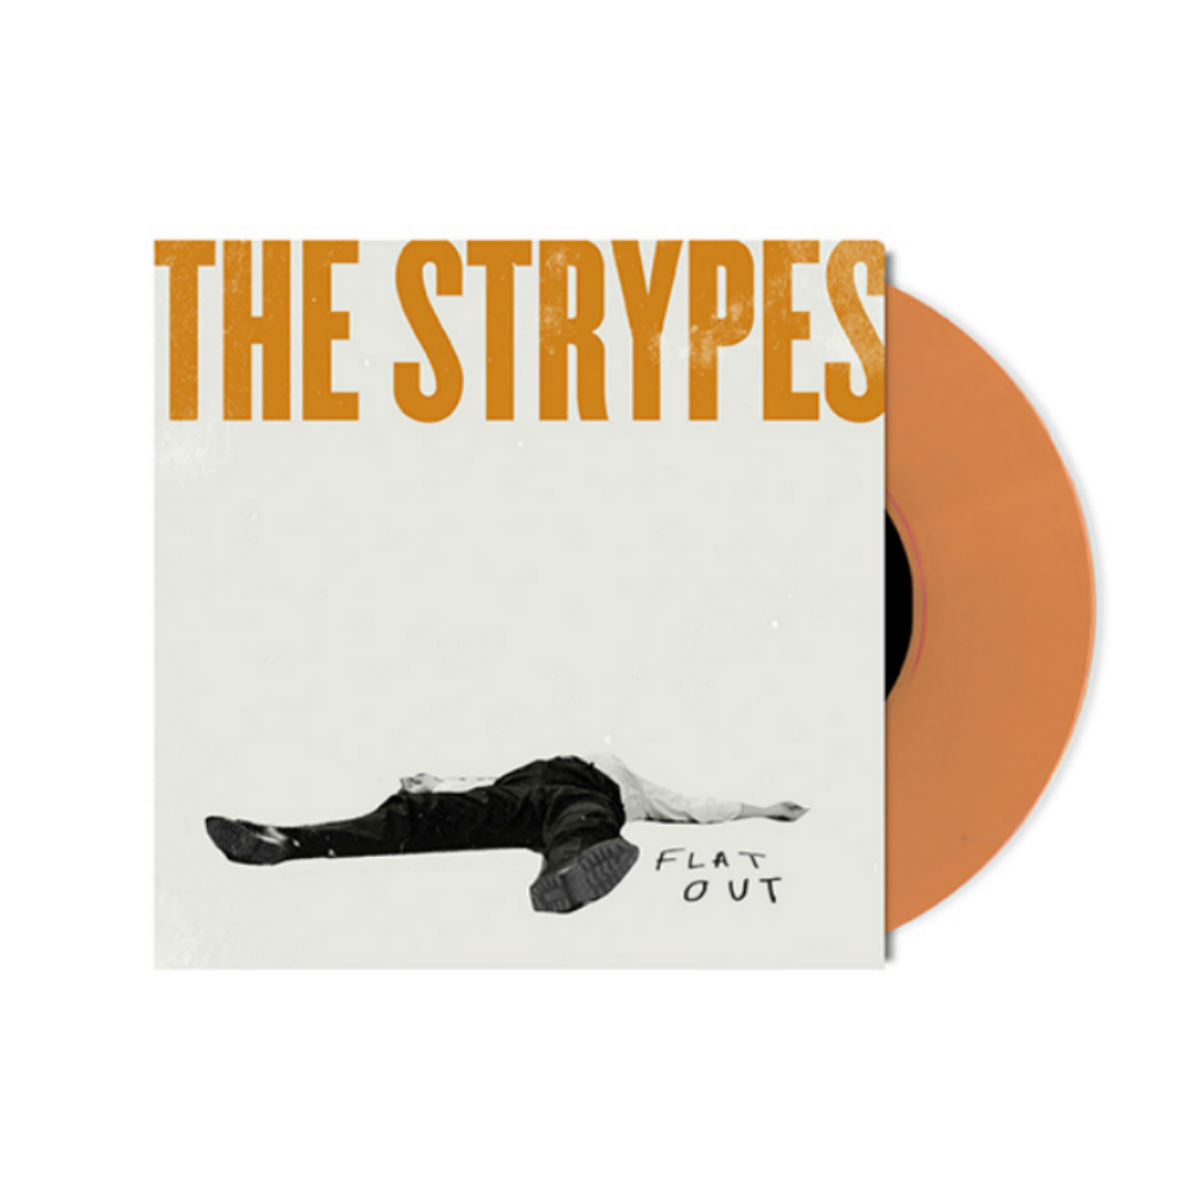 The Strypes - Flat Out 7" Single - Coloured Vinyl 